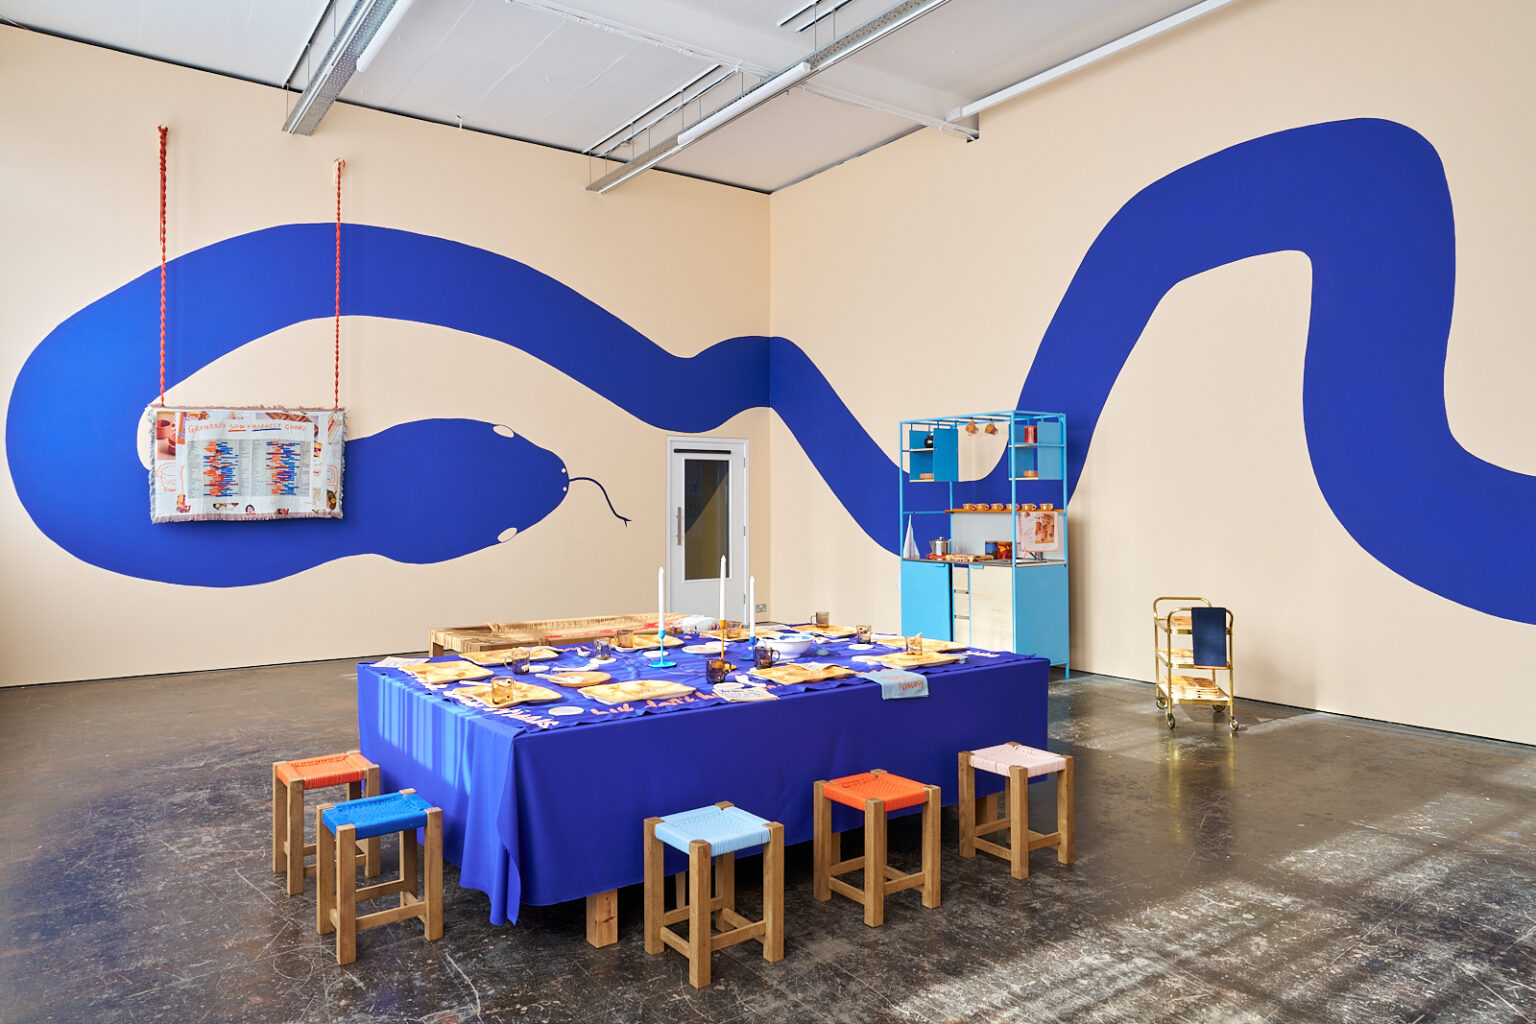 An installation view of Courses for Dis-Courses by Roo Dhissou showing a laid table with a royal blue tablecloth and stools in different colours, the walls are painted pale peach with a mural of a snake in the same royal blue as the tablecloth curling around the room.